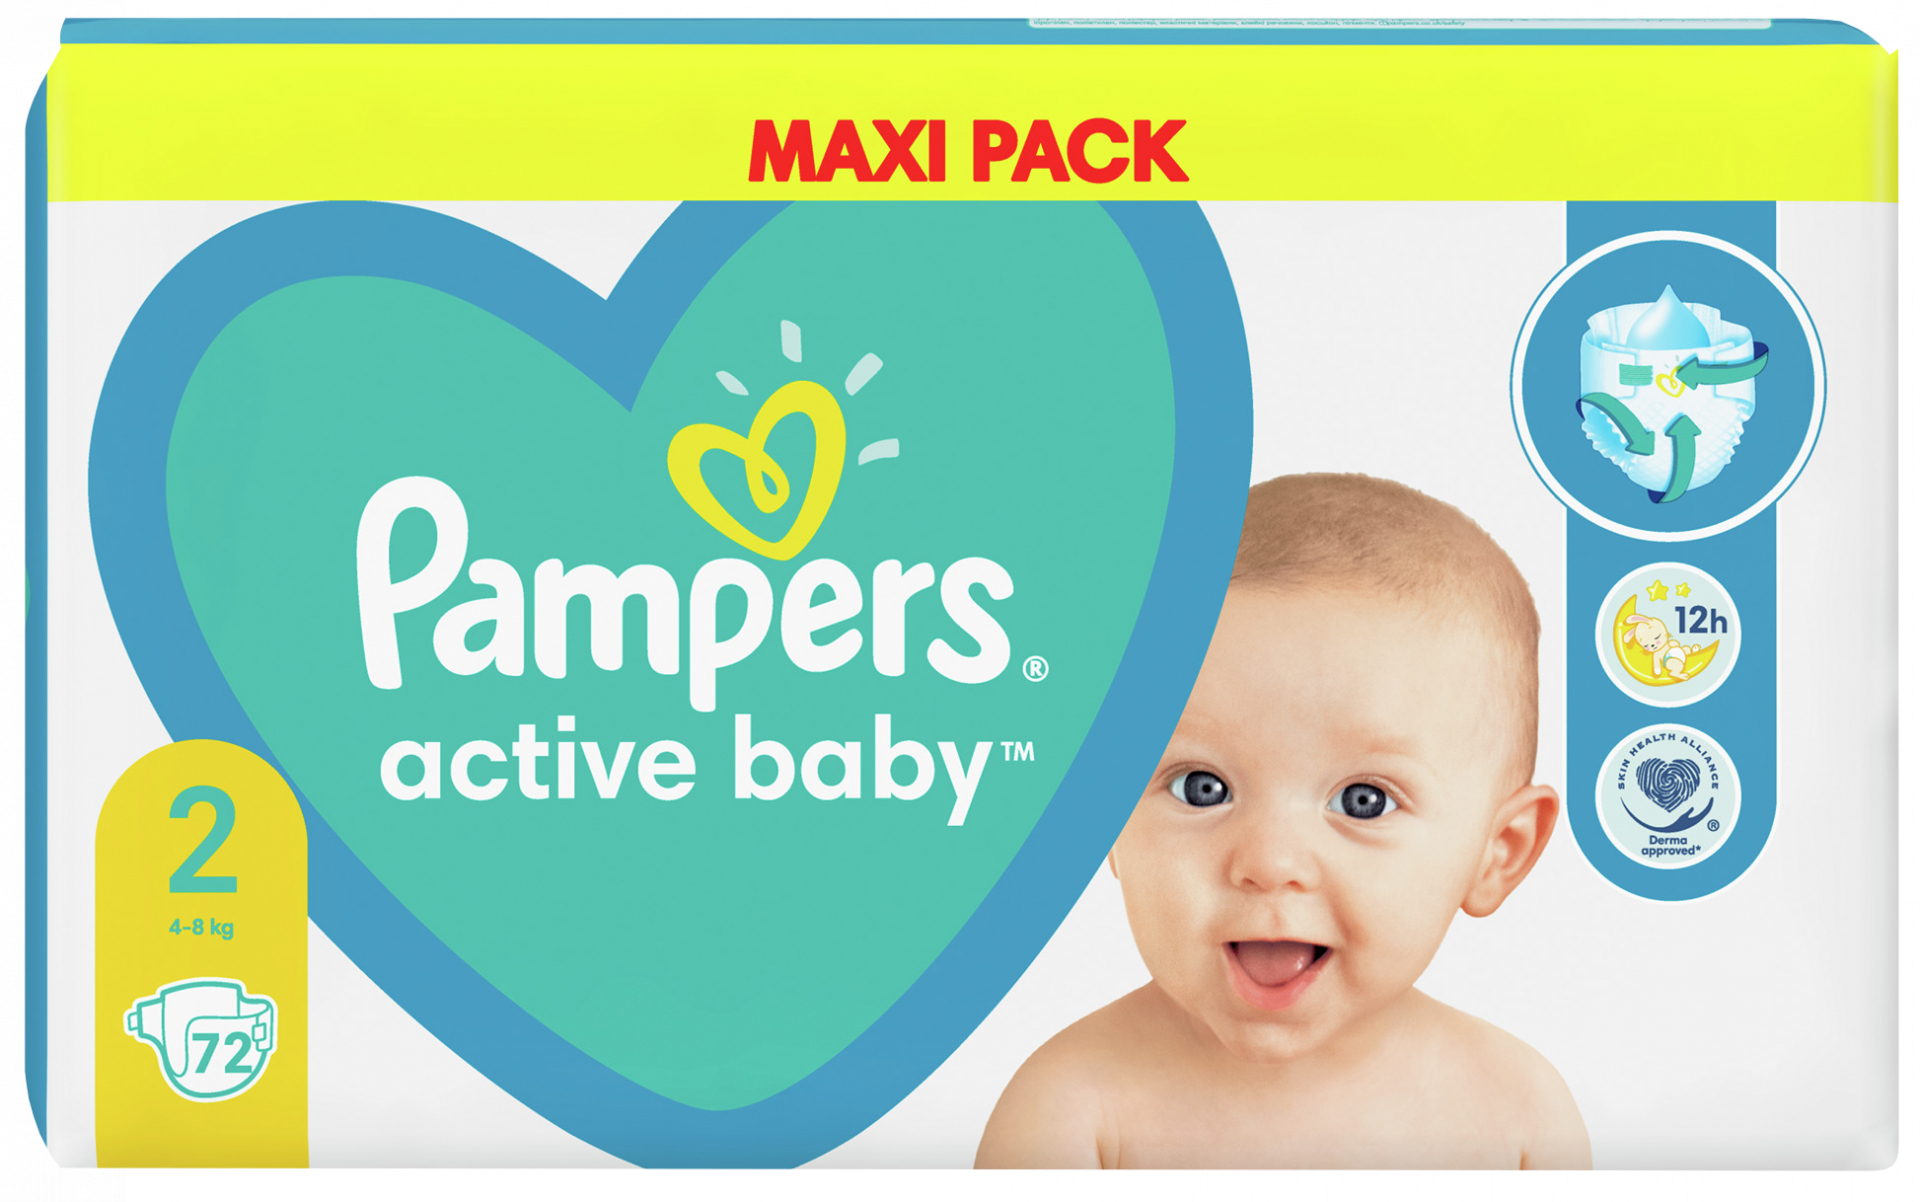 Pampers Harmonie Size 2, 39 Nappies